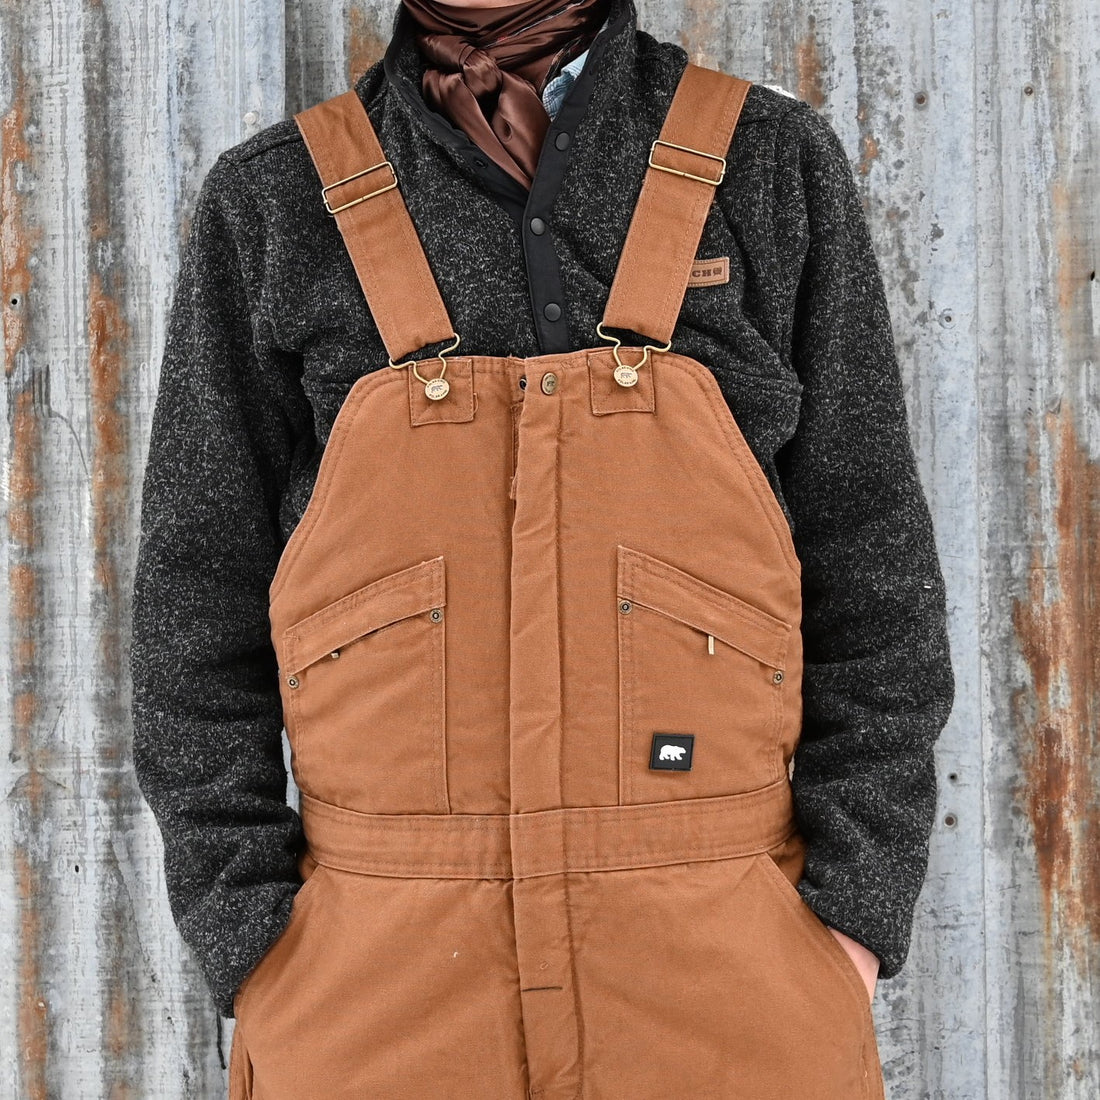 Key Ind Insulated Bib Overall in Saddle view of bibs